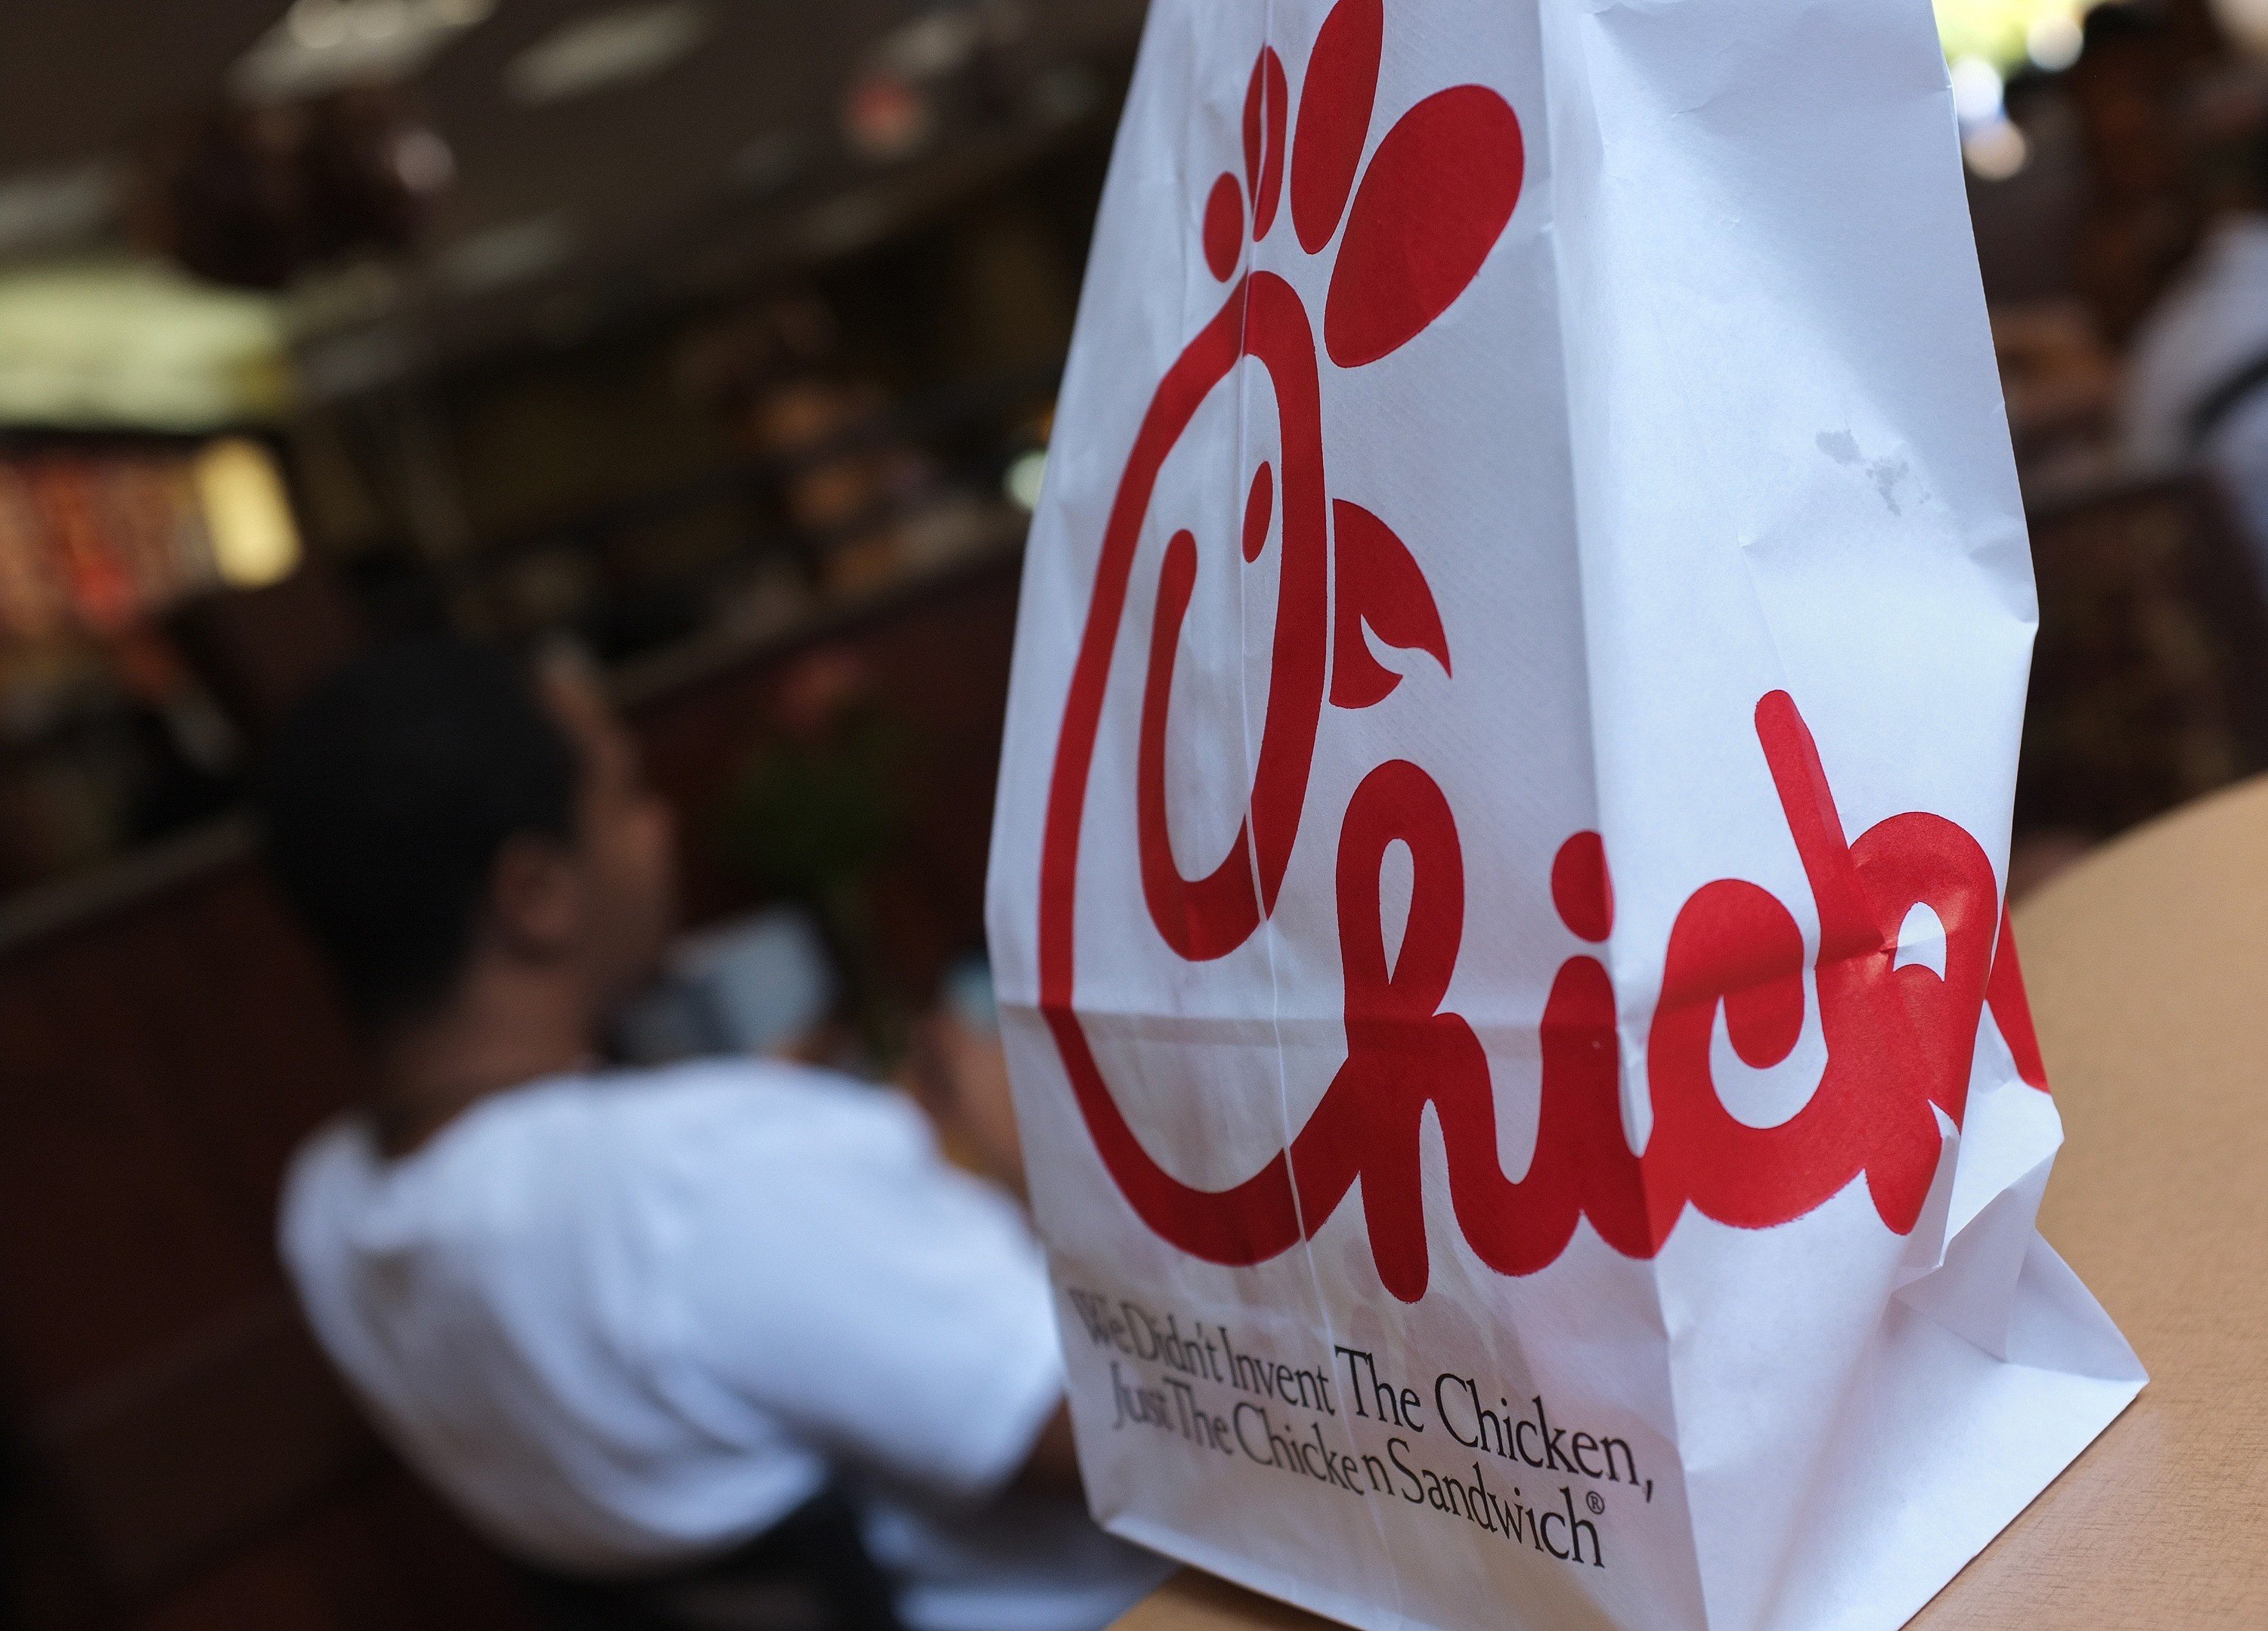 A Chick-fil-A logo is seen on a take out bag